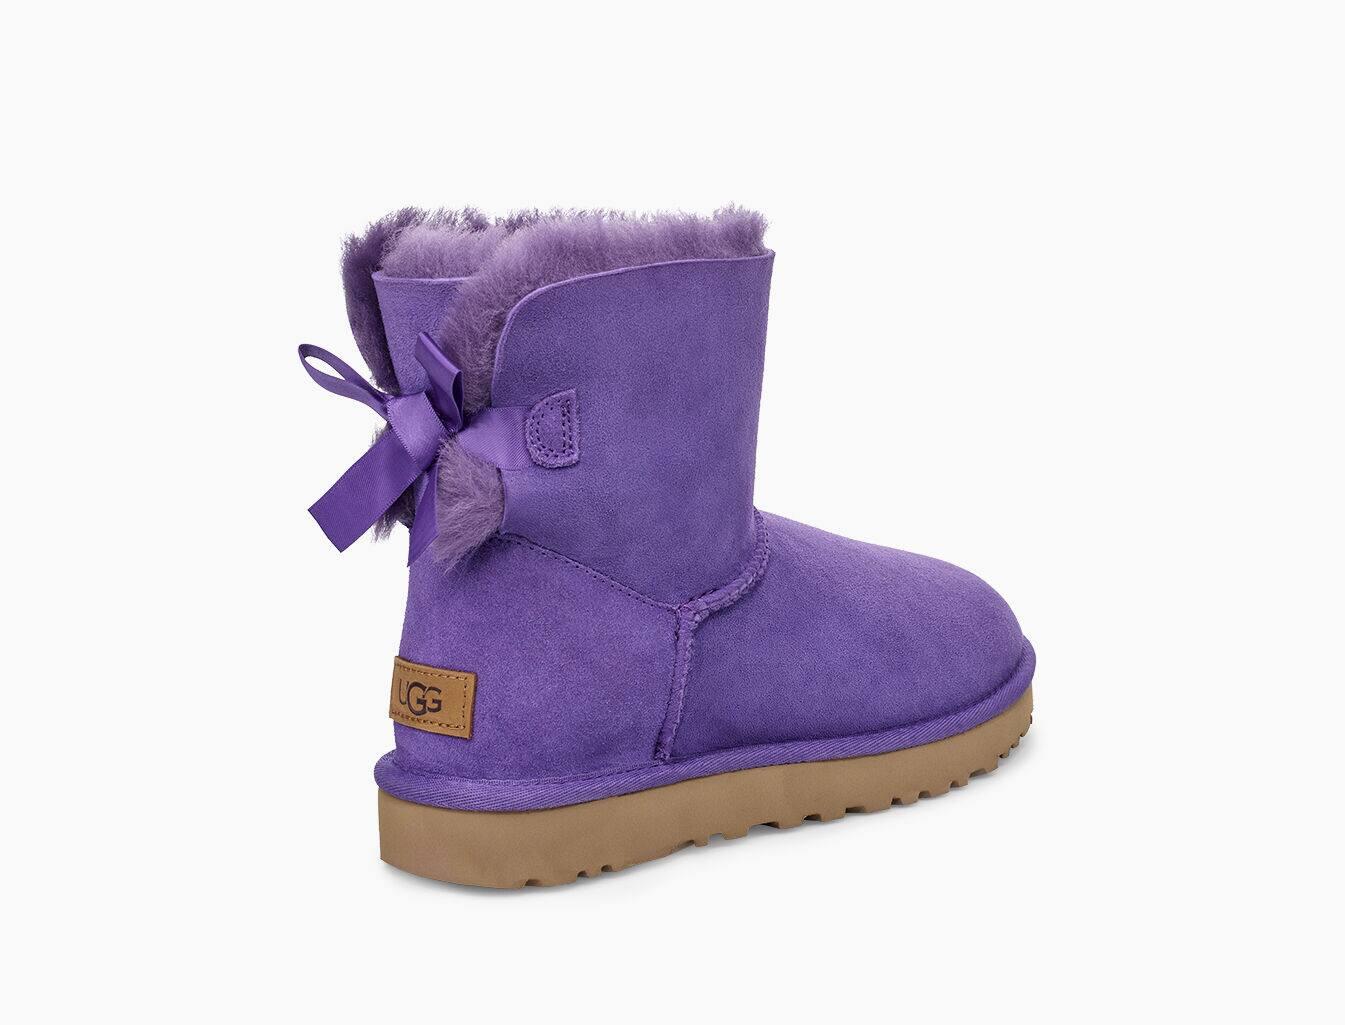 Ugg Boots Purple Bow Outlet, SAVE 54%.